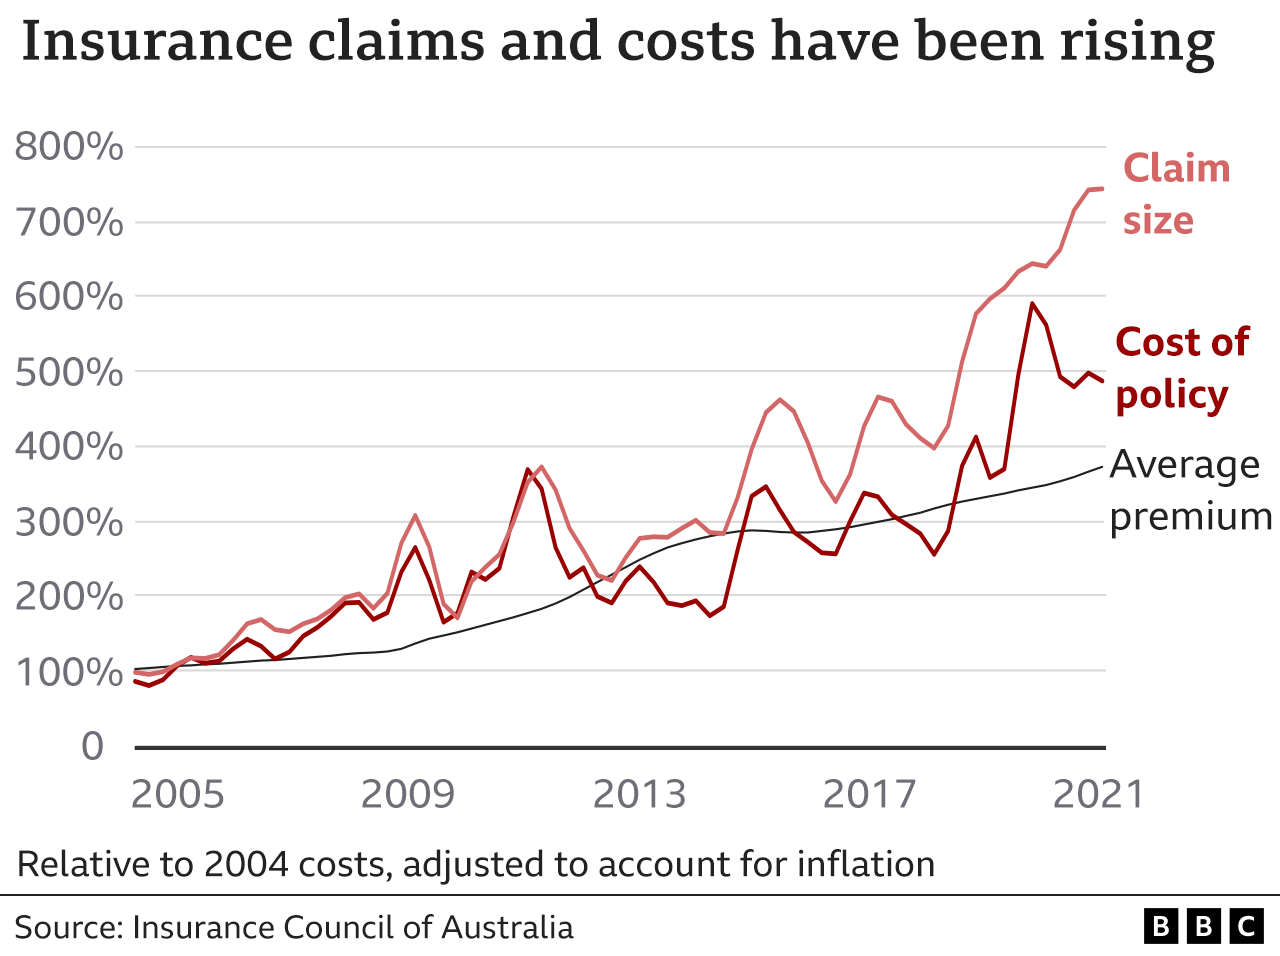 Line chart showing how both insurance claims and the cost per policy have risen sharply since 2005.